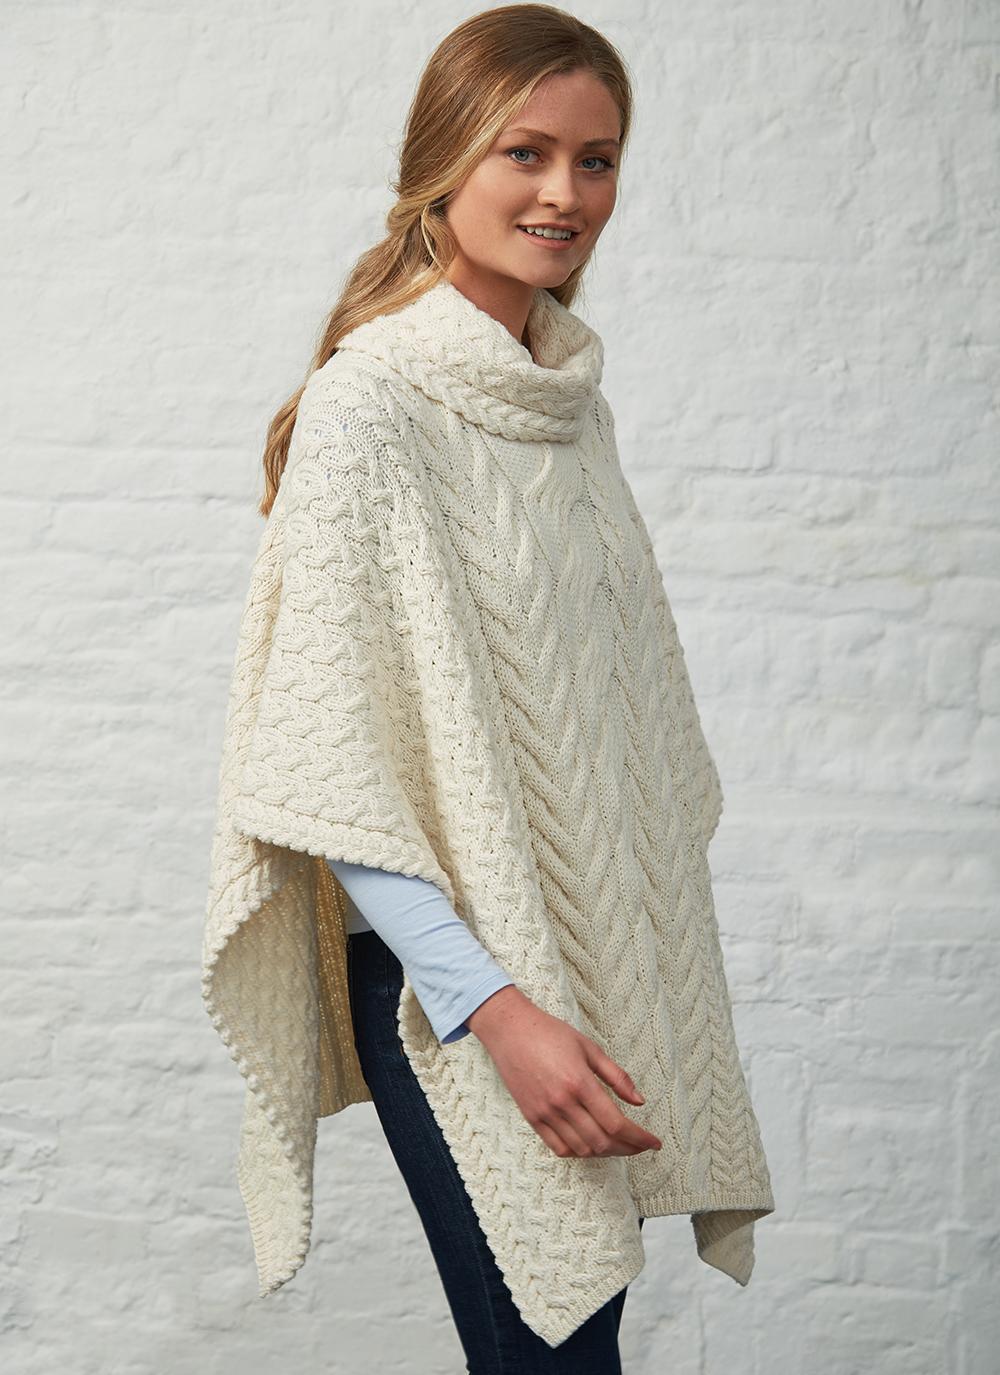 Cloak Poncho Wrap with Cowl Neck